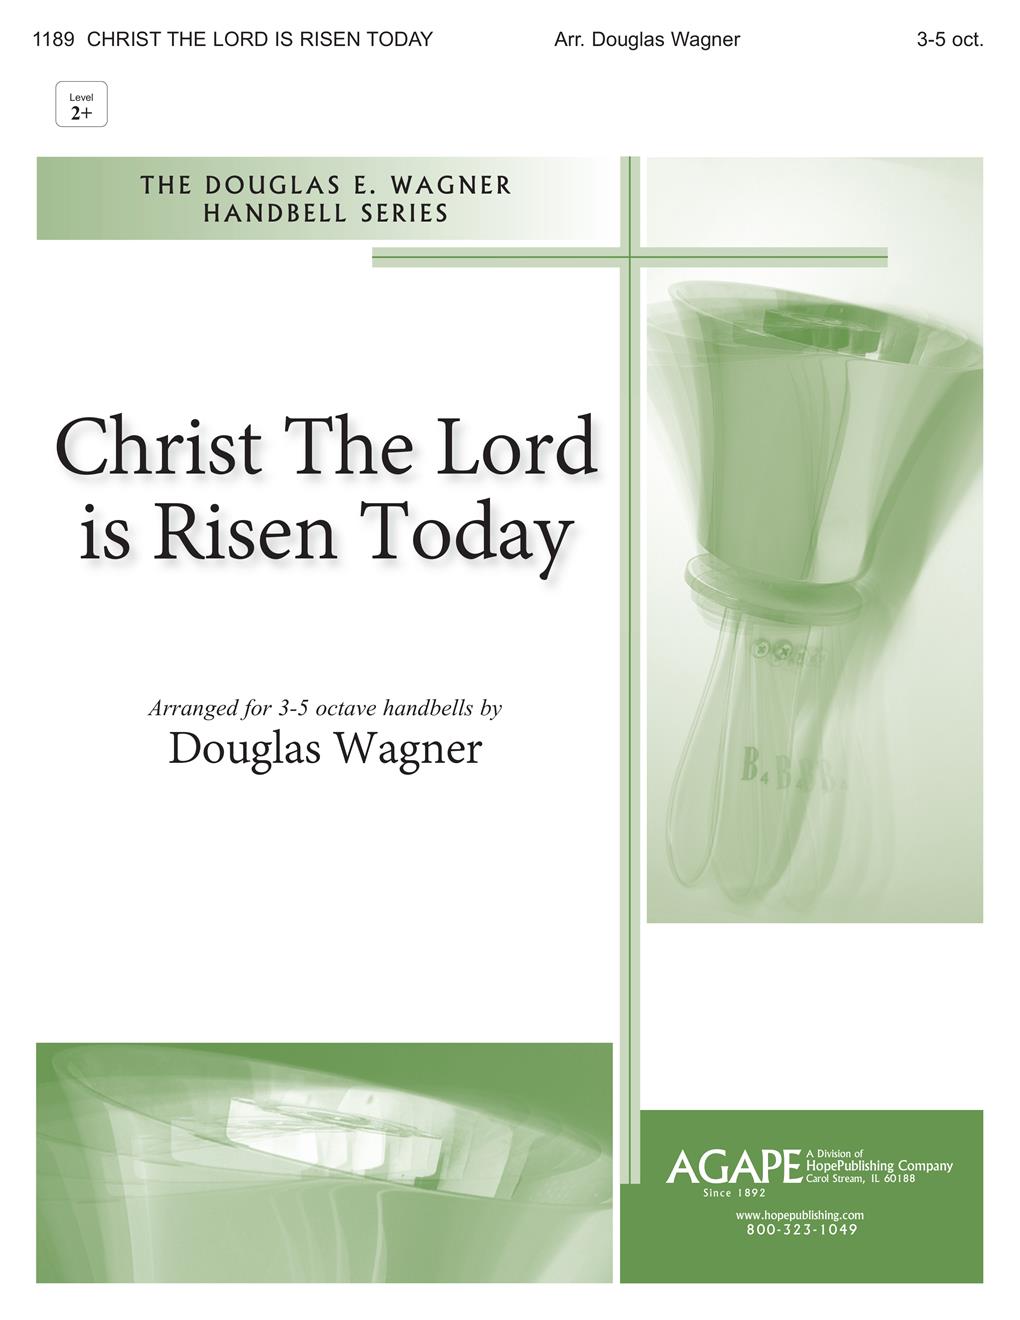 Christ the Lord Is Risen Today - 3-5 Octave Cover Image